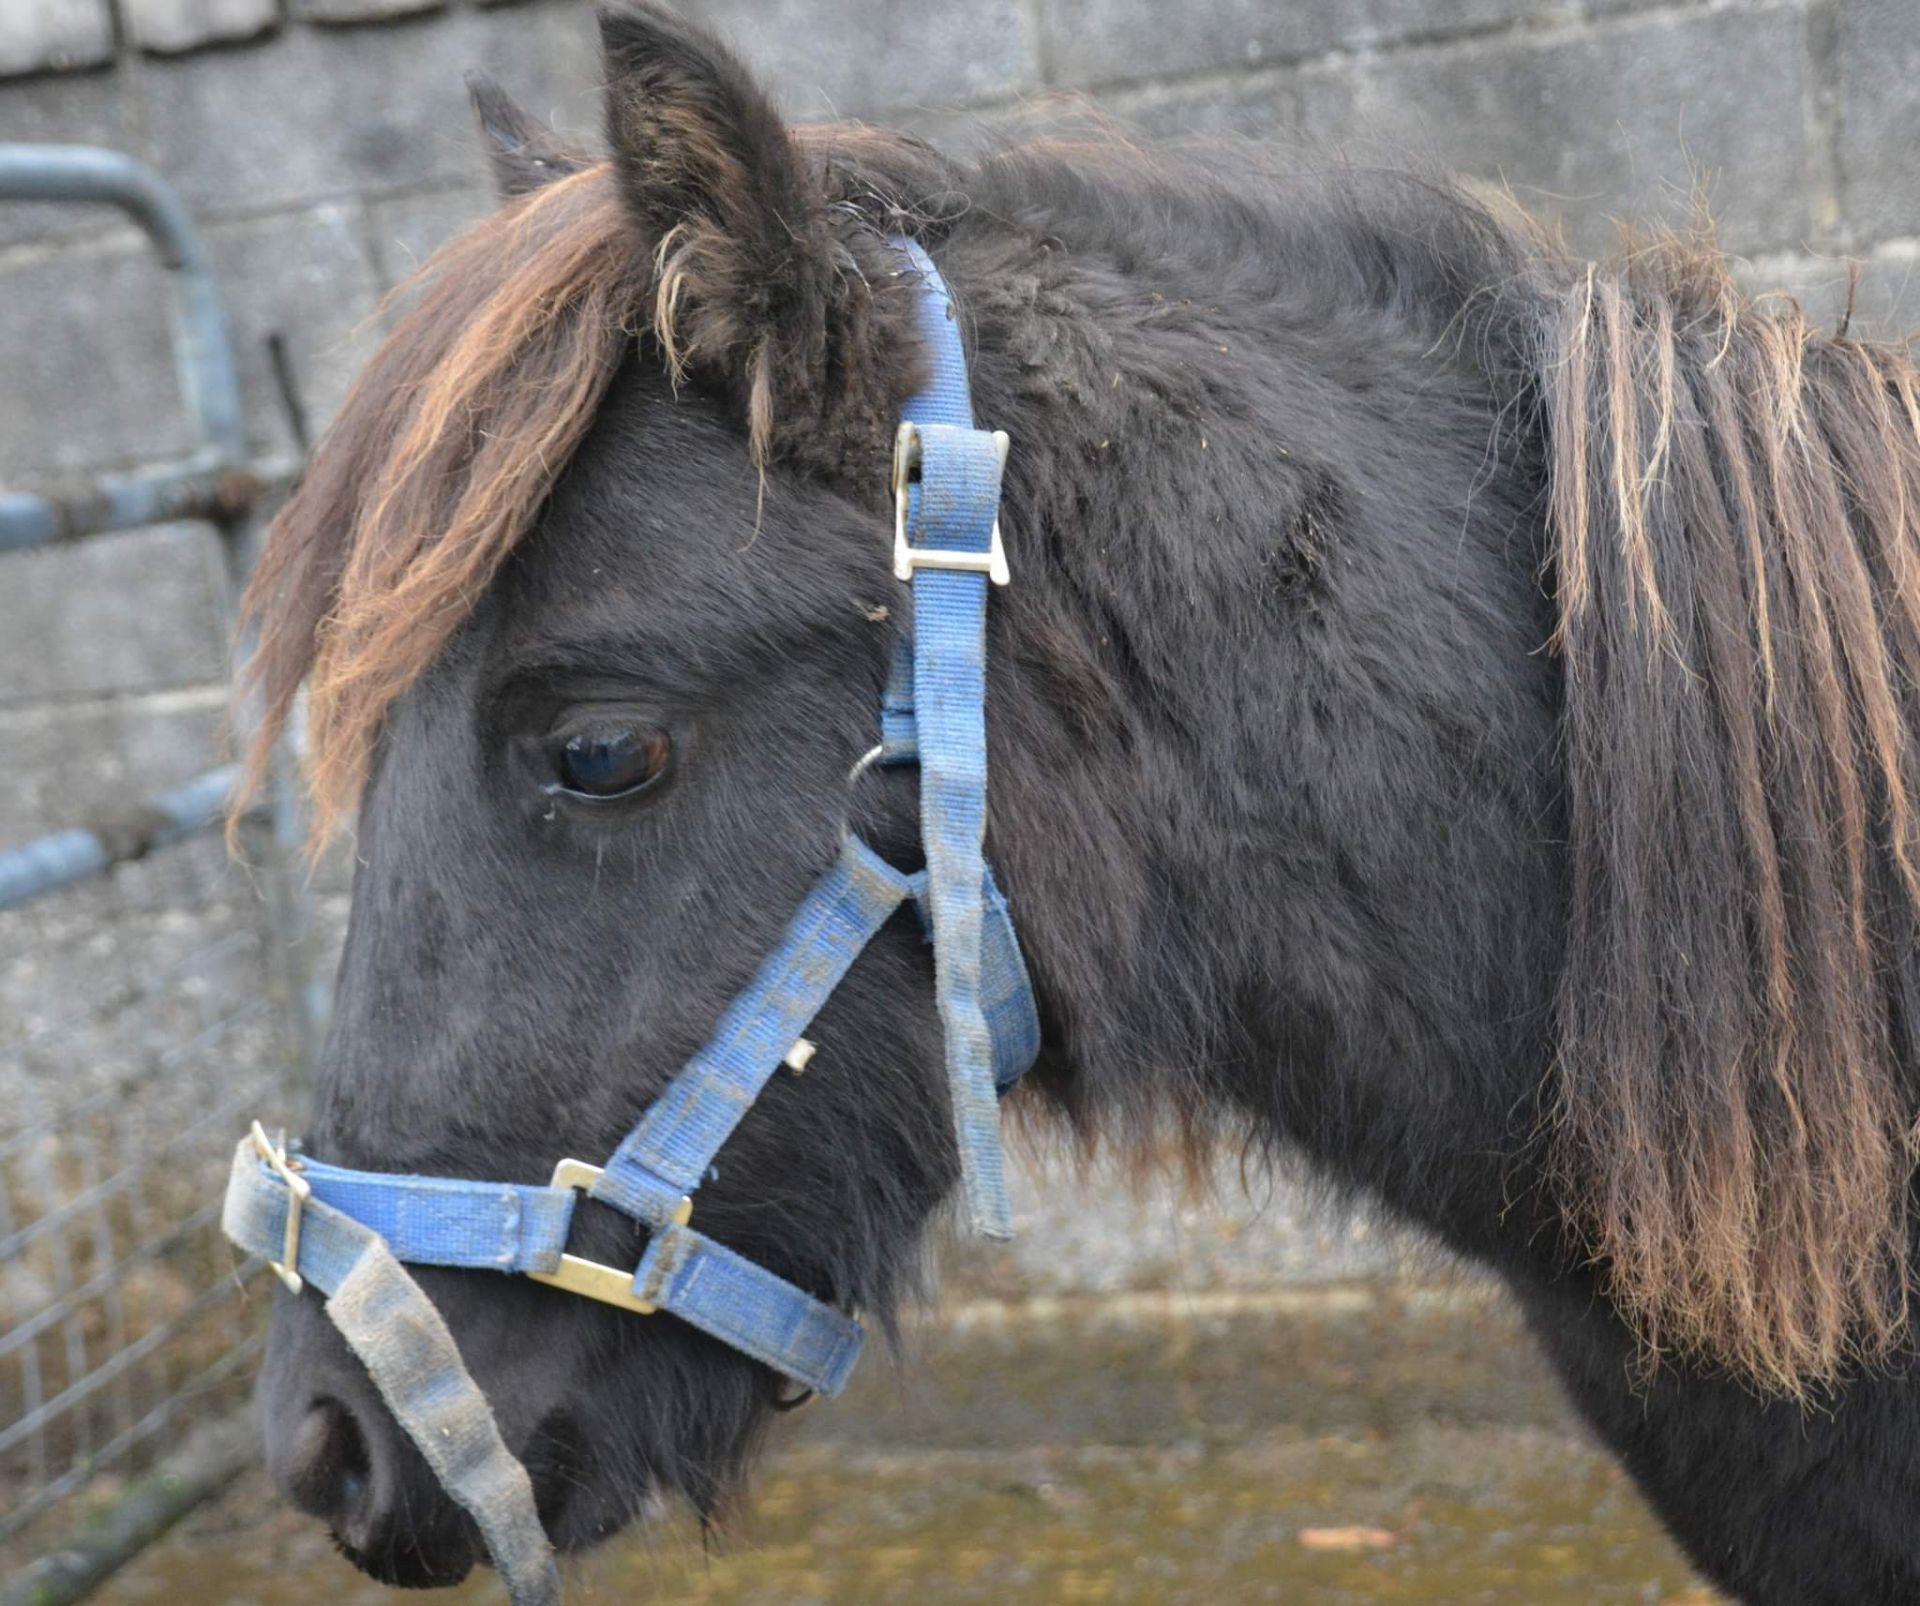 'BLACKATOR LILLIBET' DARTMOOR HILL PONY BLACK FILLY APPROX 7 MONTHS OLD - Image 4 of 7